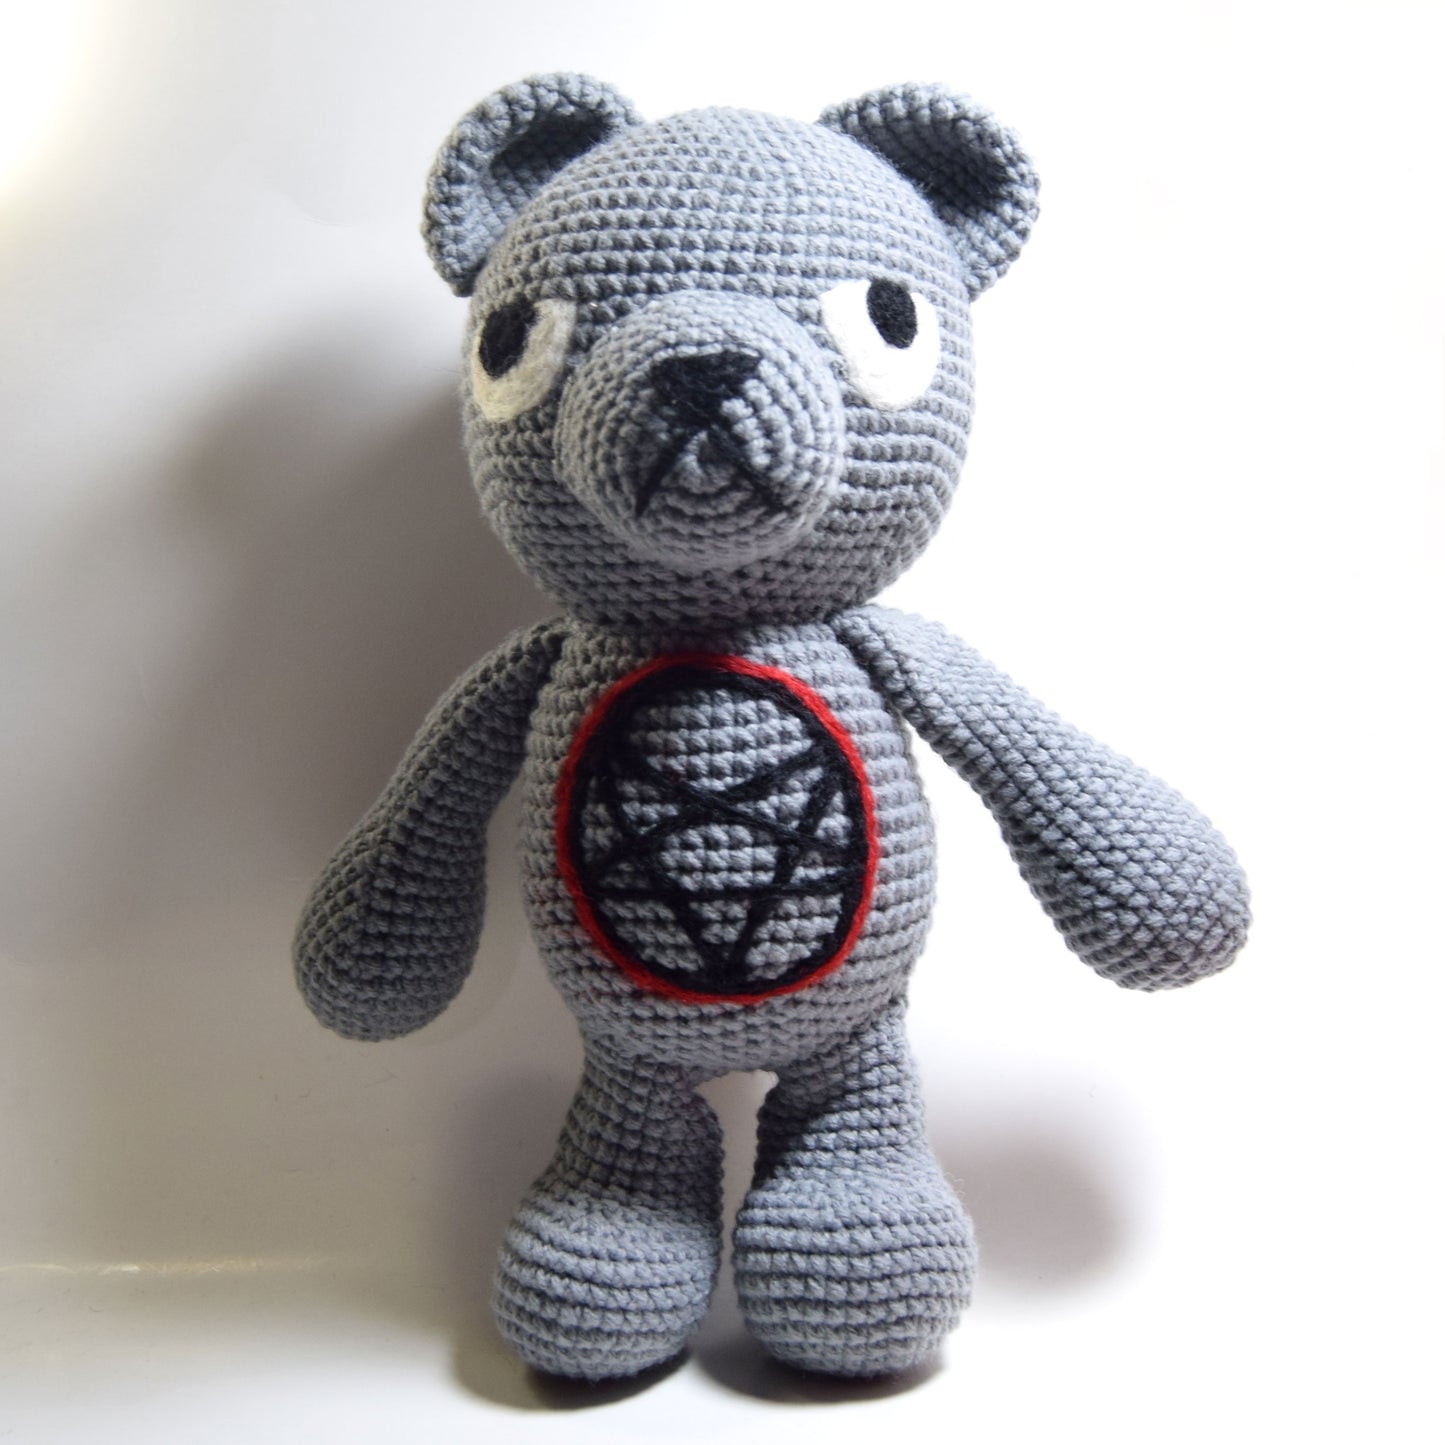 Anton LaBear Pattern + Coloring Page